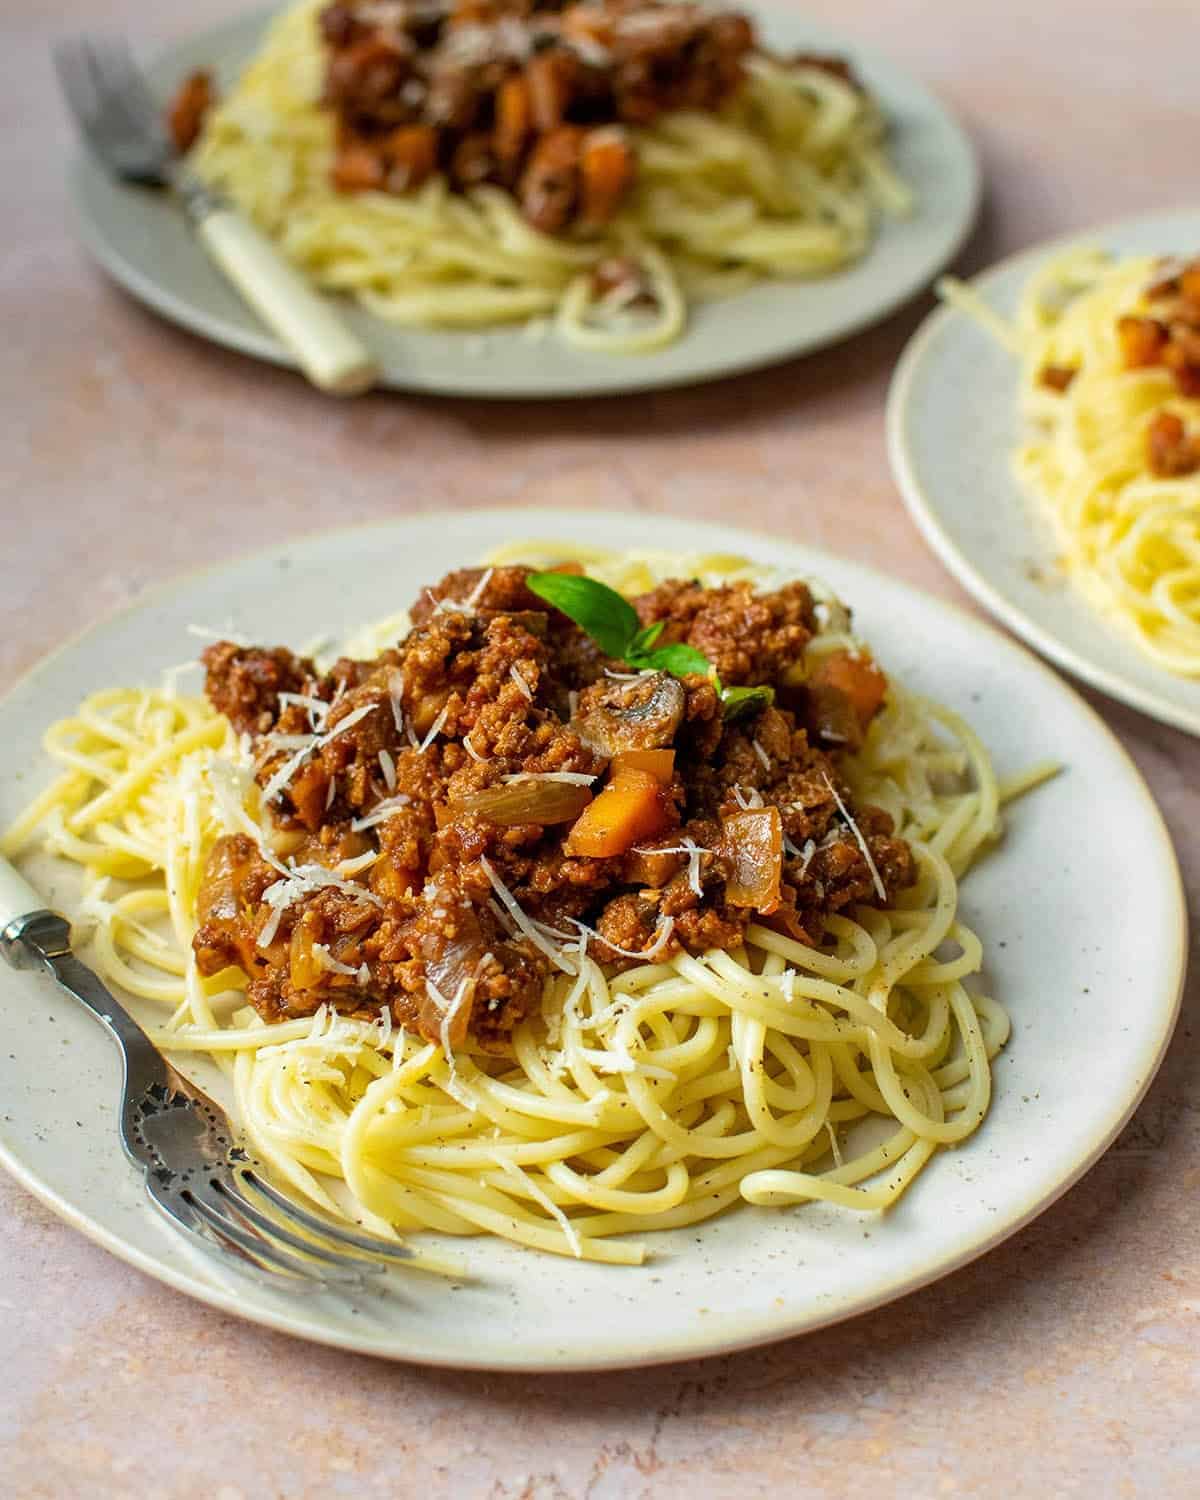 Vegan spaghetti bolognese on a plate with two more plates in the background